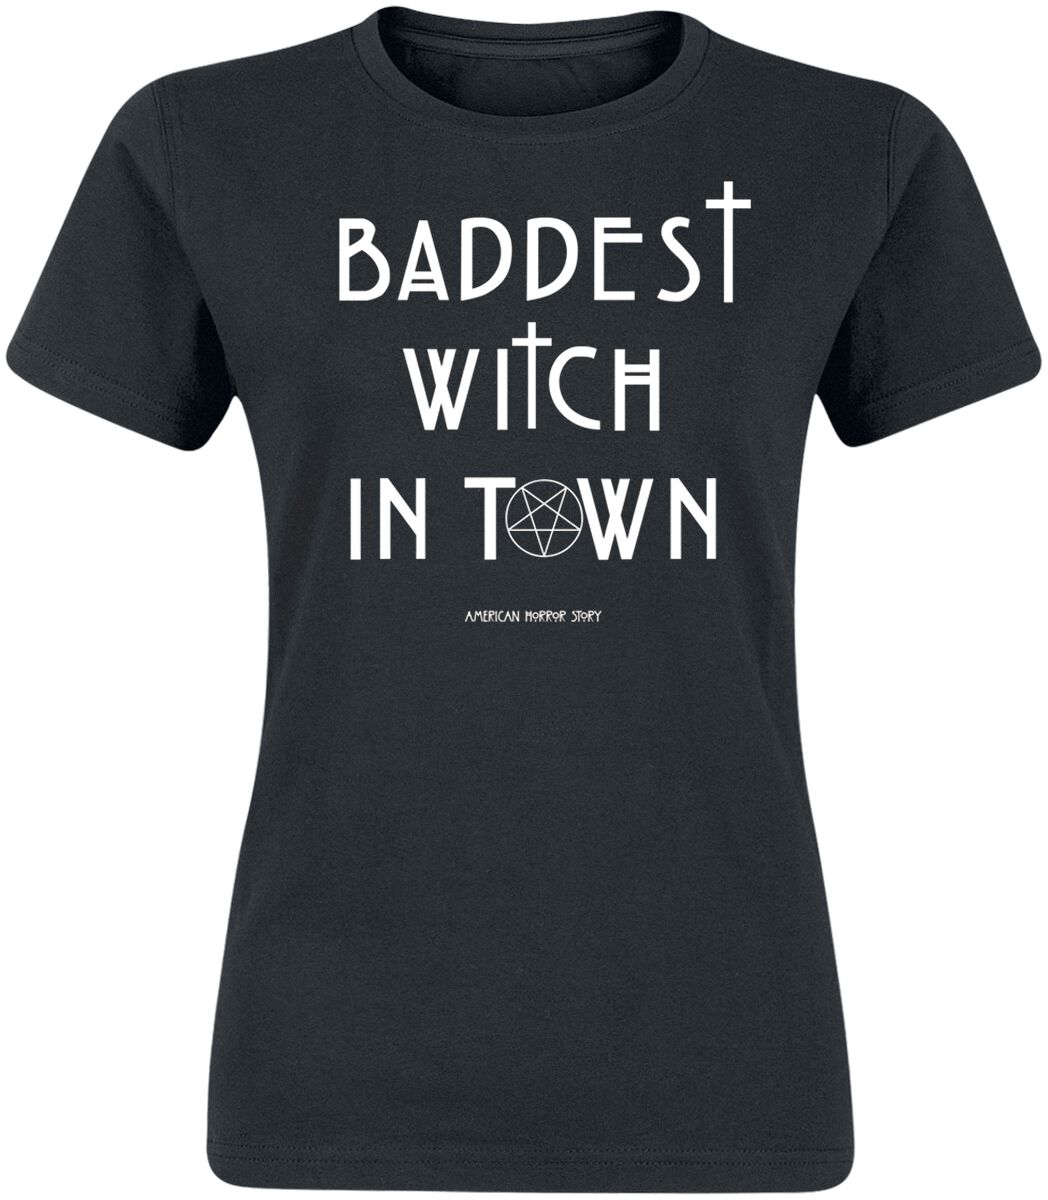 American Horror Story Baddest Witch In Town T-Shirt black